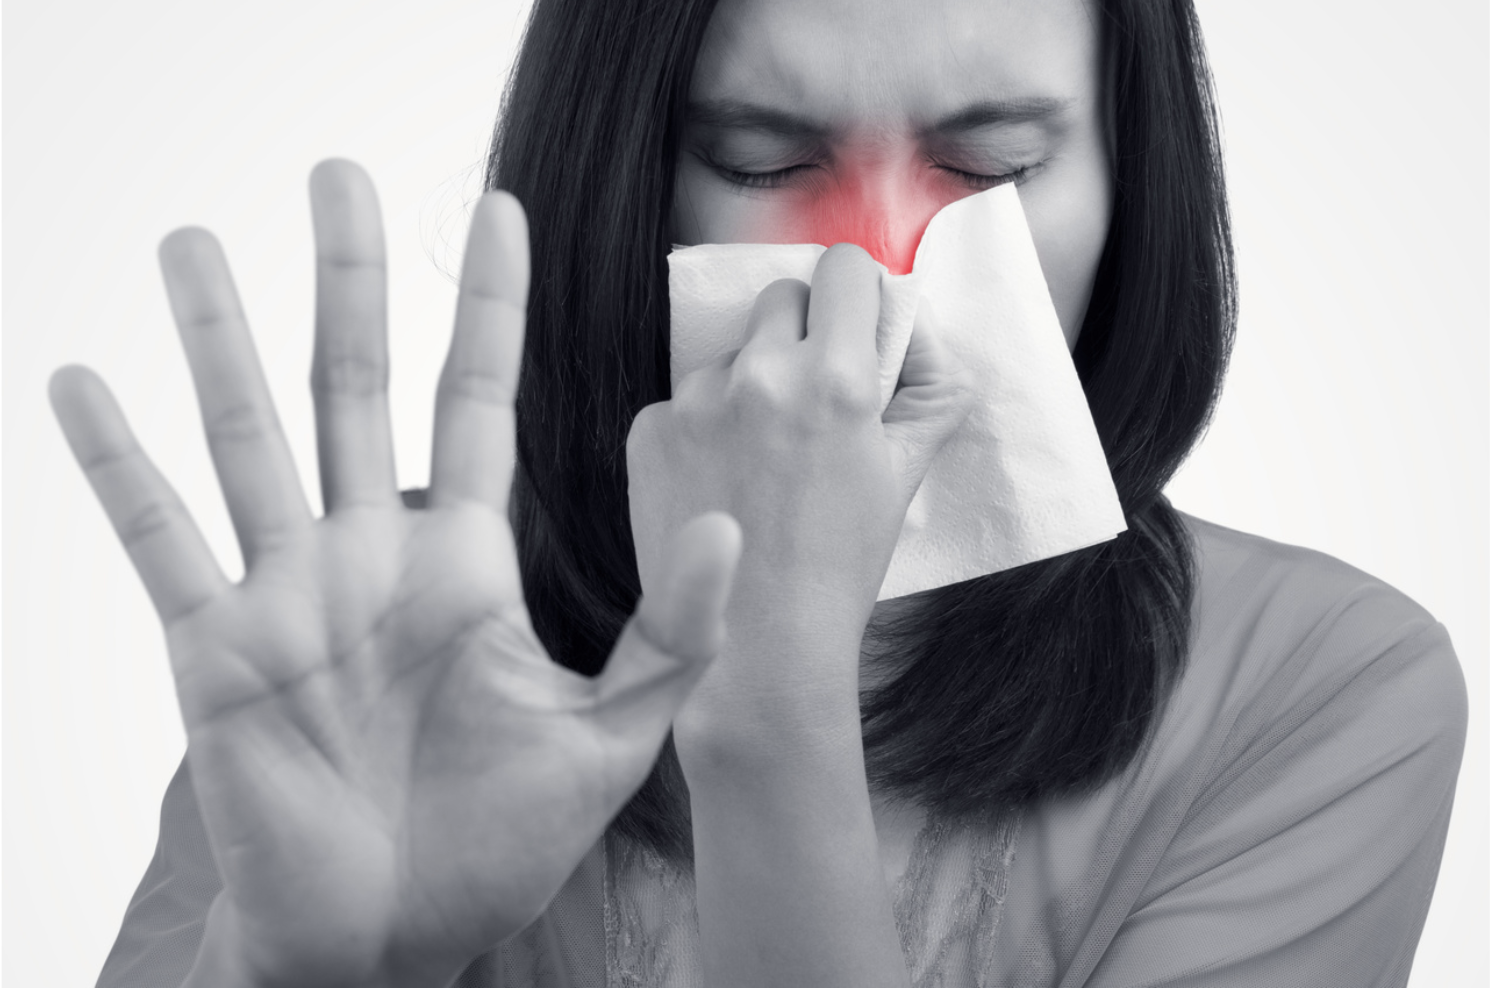 How to Tell the Difference Between Cough/Cold Symptoms and COVID-19